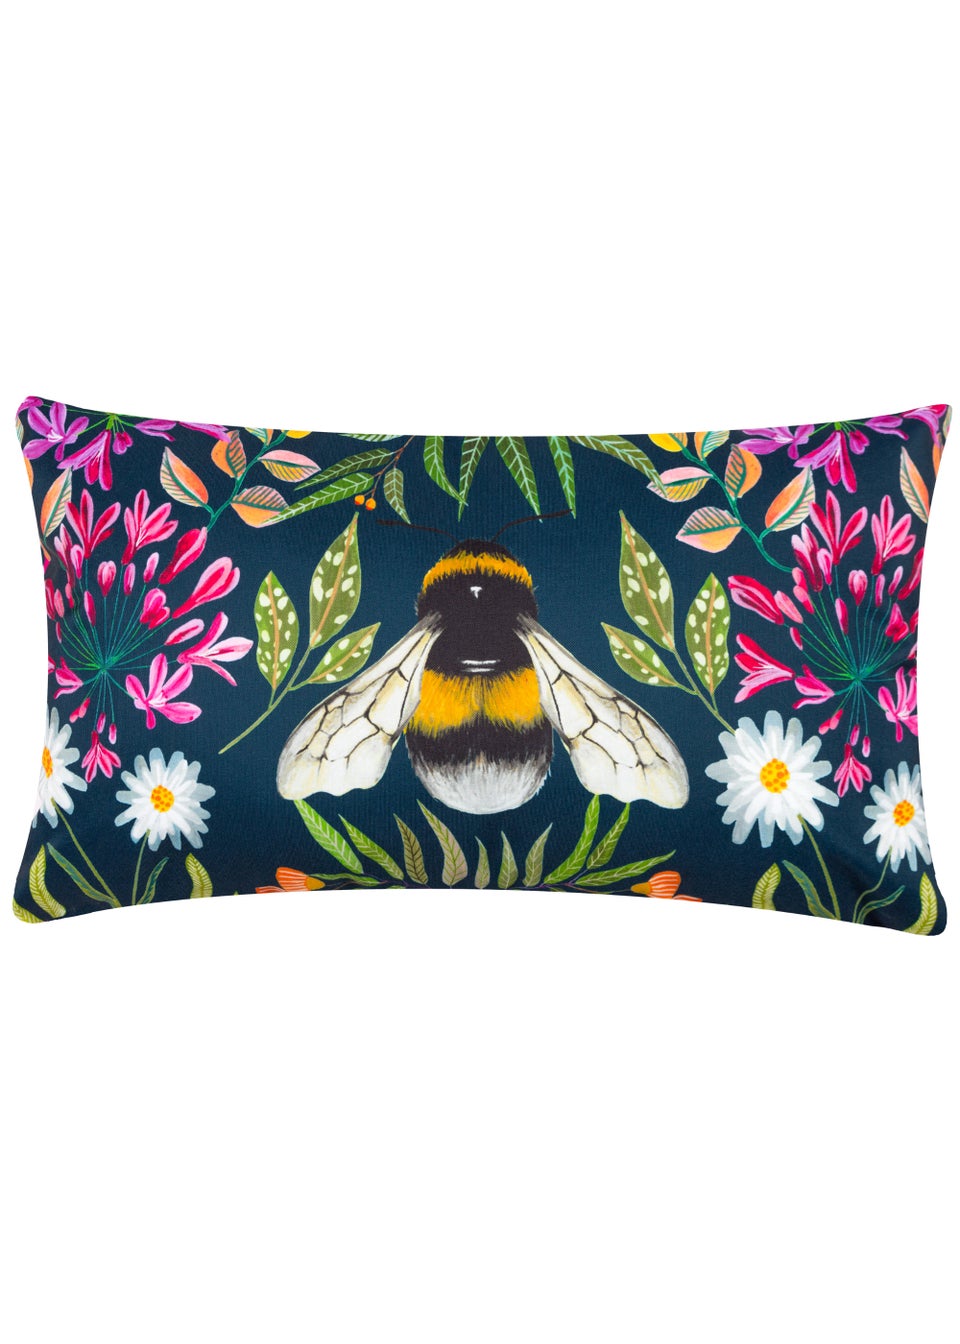 Wylder Nature House of Bloom Zinnia Bee Outdoor Filled Cushion (30cm x 50cm x 8cm)